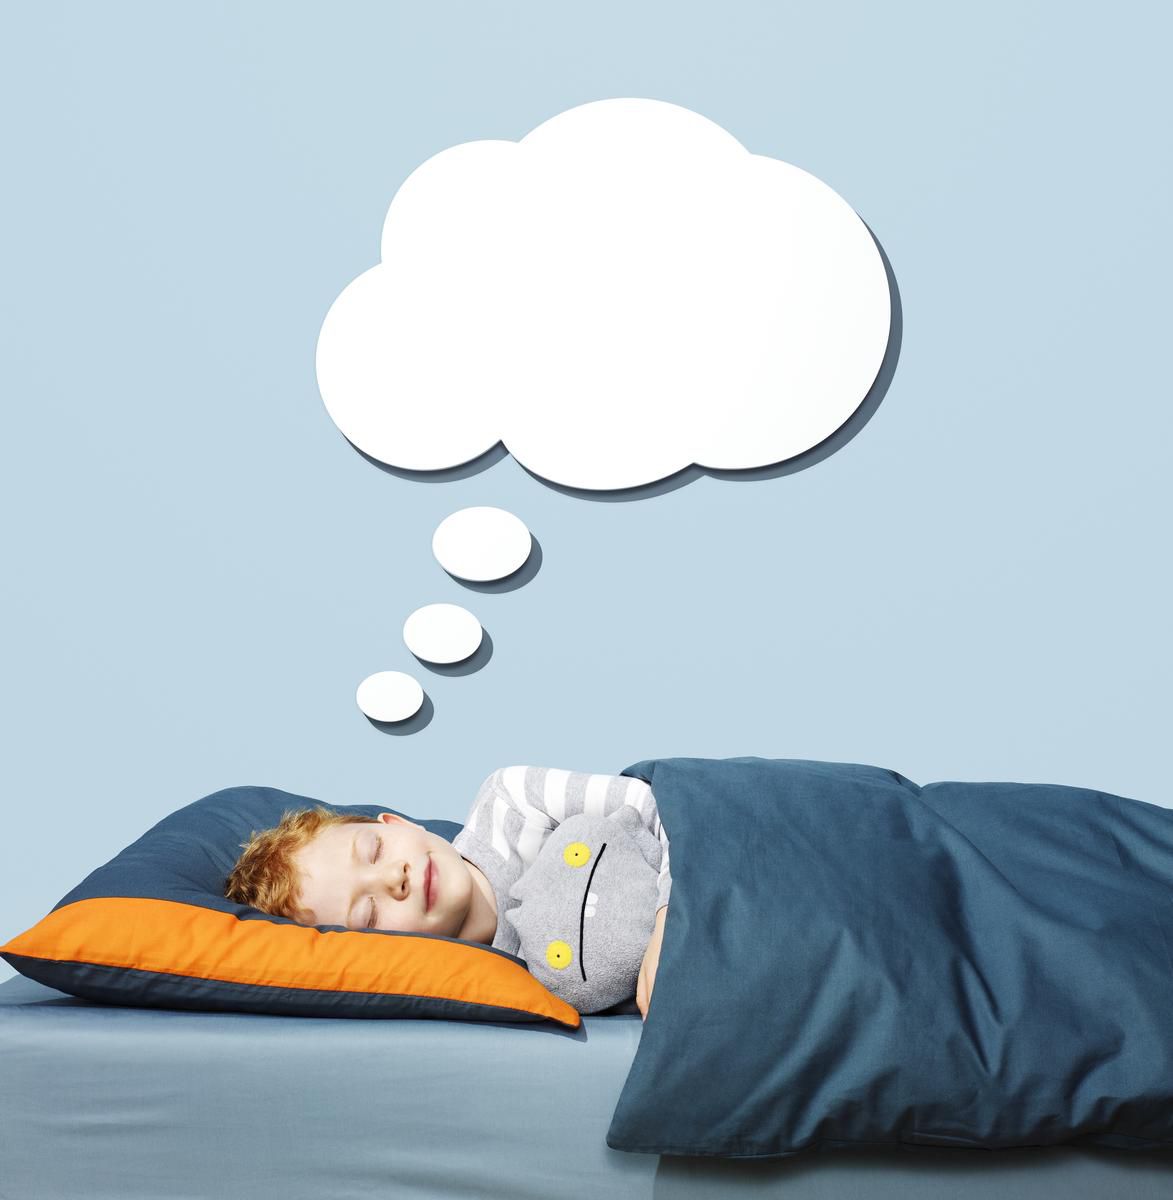 Child Sleeping and Dreaming